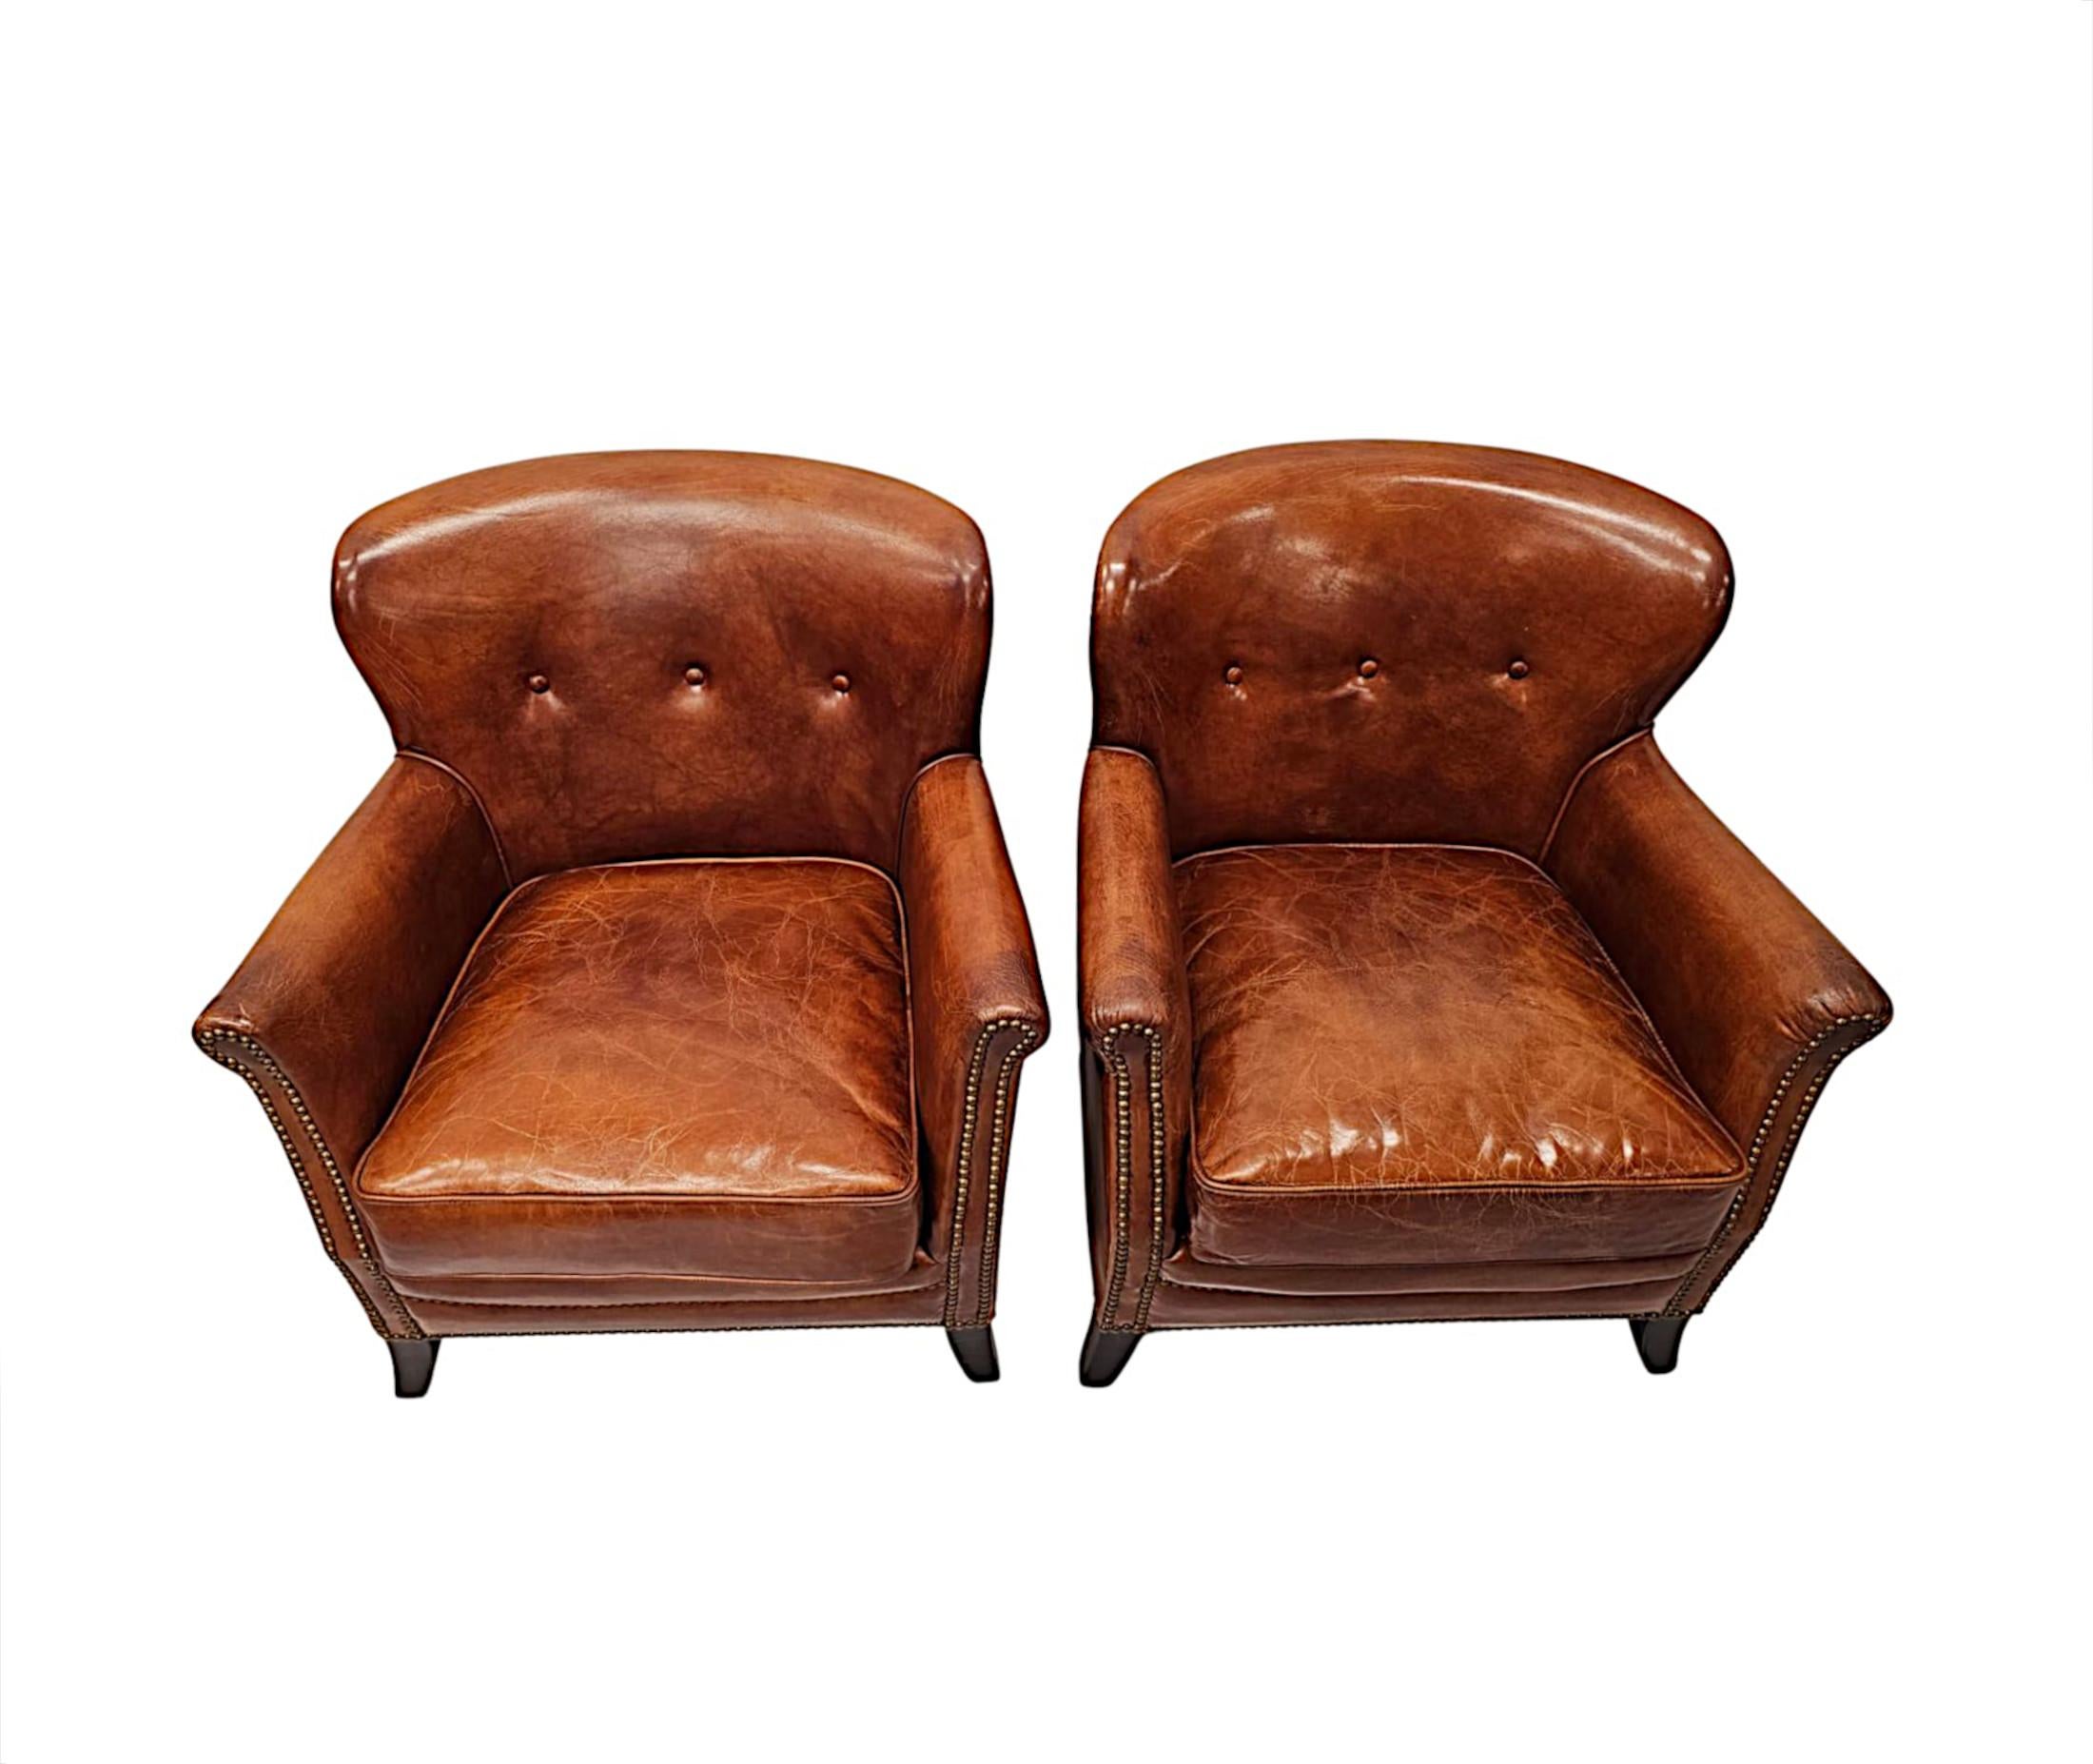 Contemporary A Stunning Pair of Small Leather Club Armchairs in the Art Deco Style  For Sale